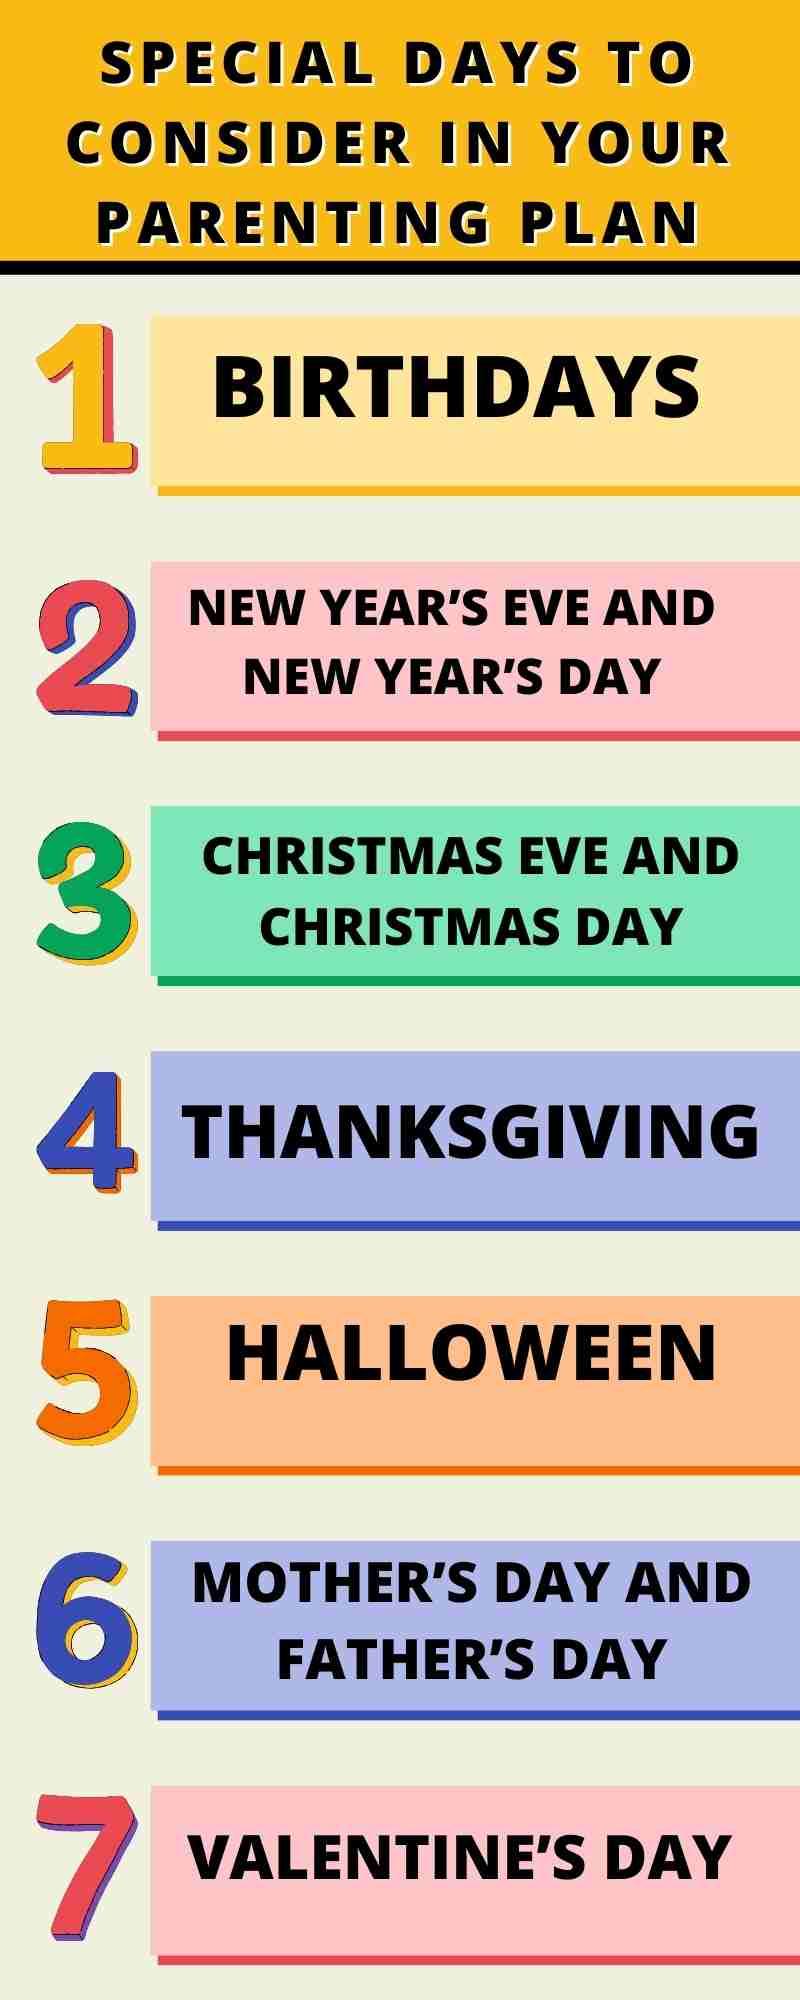 An infographic listing seven special days to consider planning around, including birthdays, New Year's Eve, Christmas Day, Thanksgiving, Halloween, Mother's Day, and Valentine's Day.